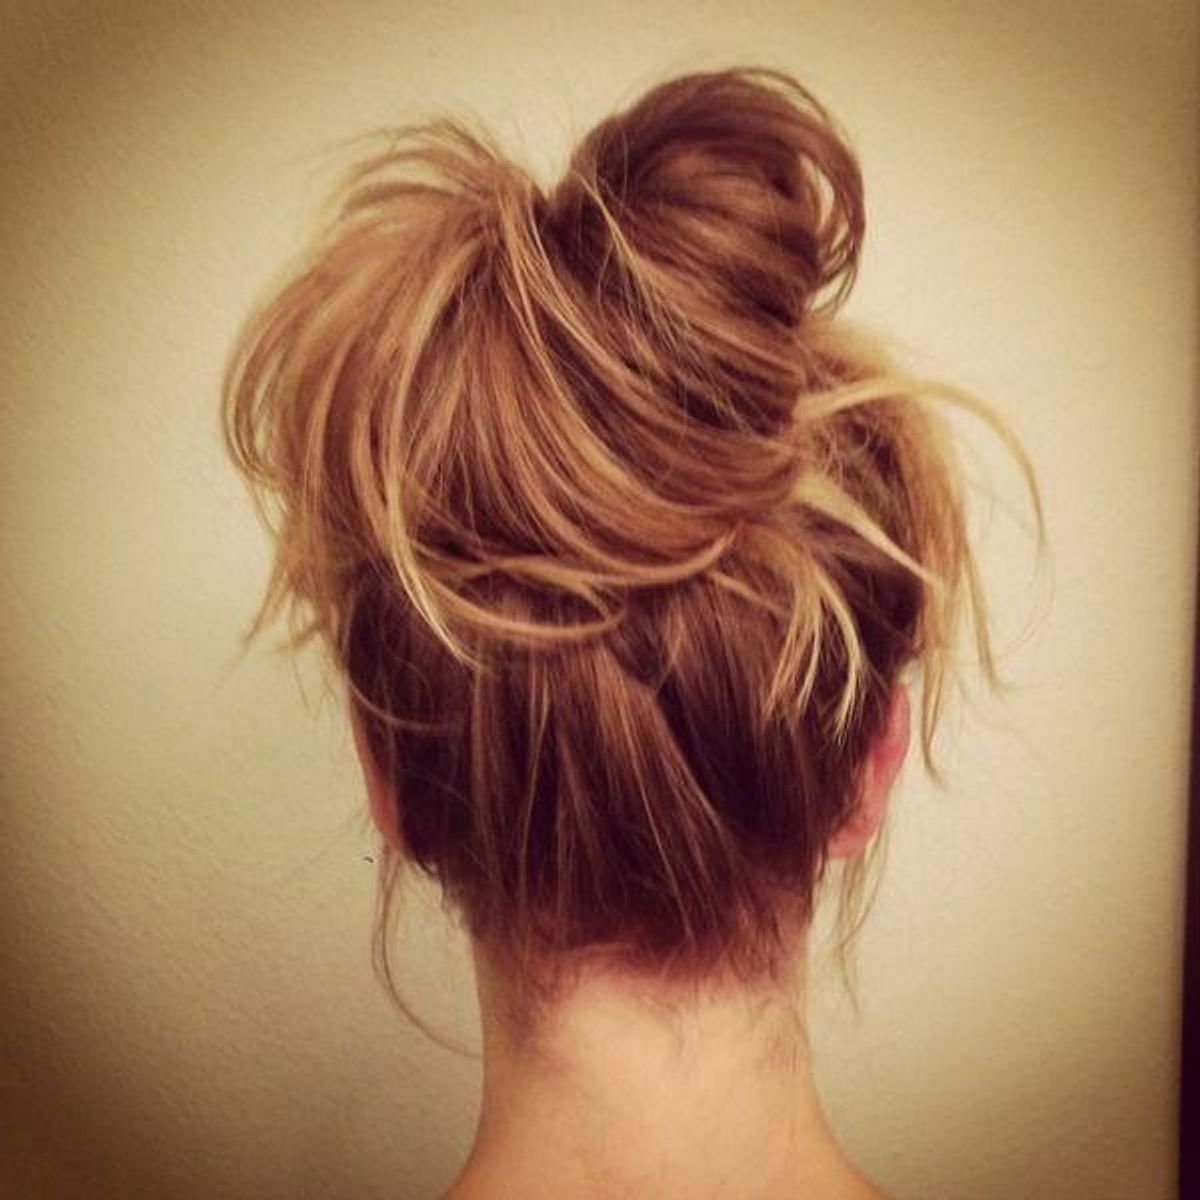 The Struggle Of Mastering The "Messy Bun"-Look